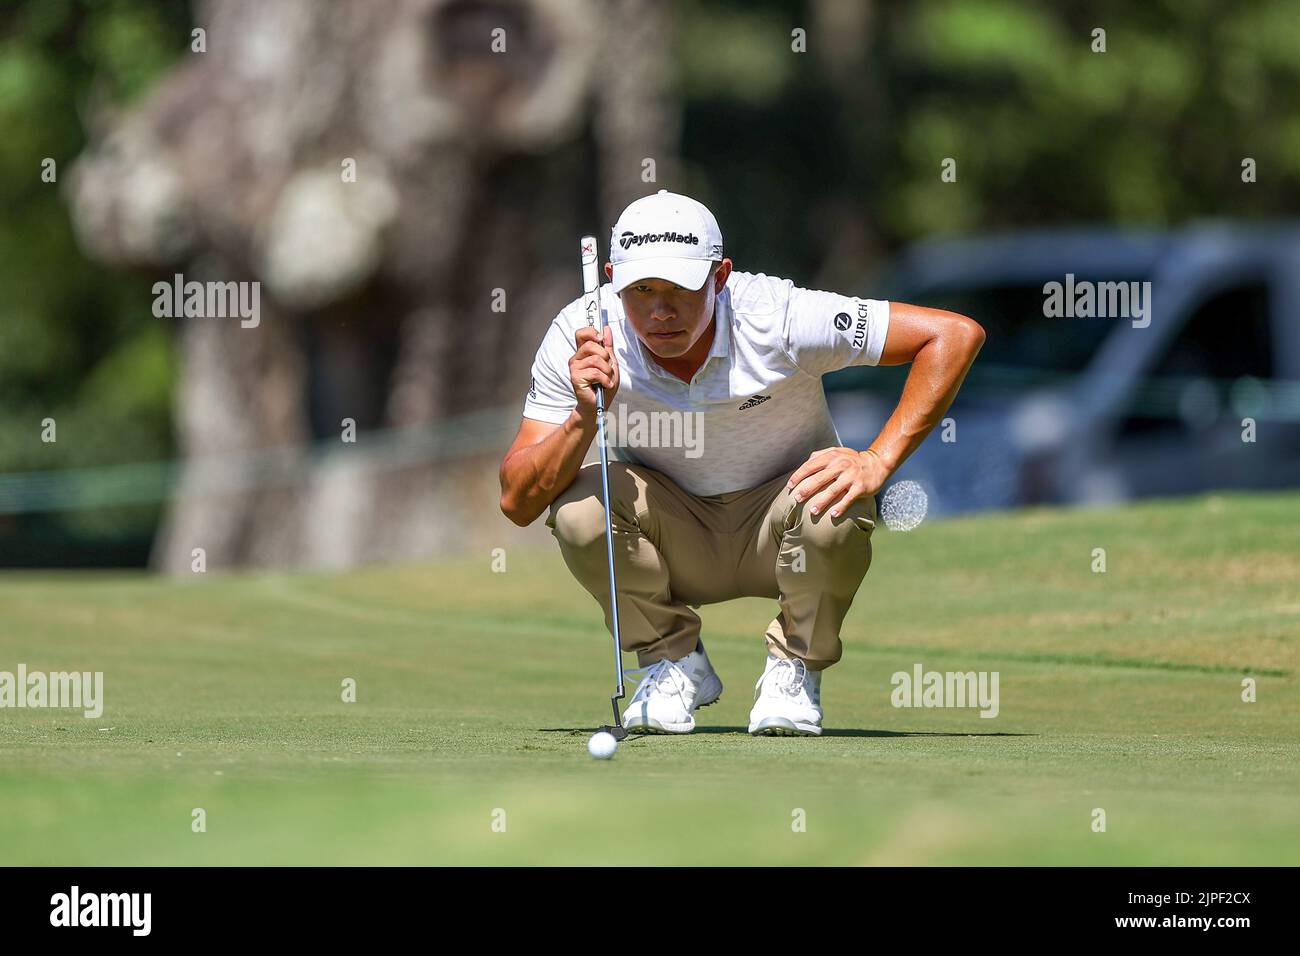 August 13, 2022: Collin Morikawa sizes up his putt during the third round of the FedEx St. Jude Championship golf tournament at TPC Southwind in Memphis, TN. Gray Siegel/Cal Sport Media/Sipa USA(Credit Image: © Gray Siegel/Cal Sport Media/Sipa USA) Stock Photo